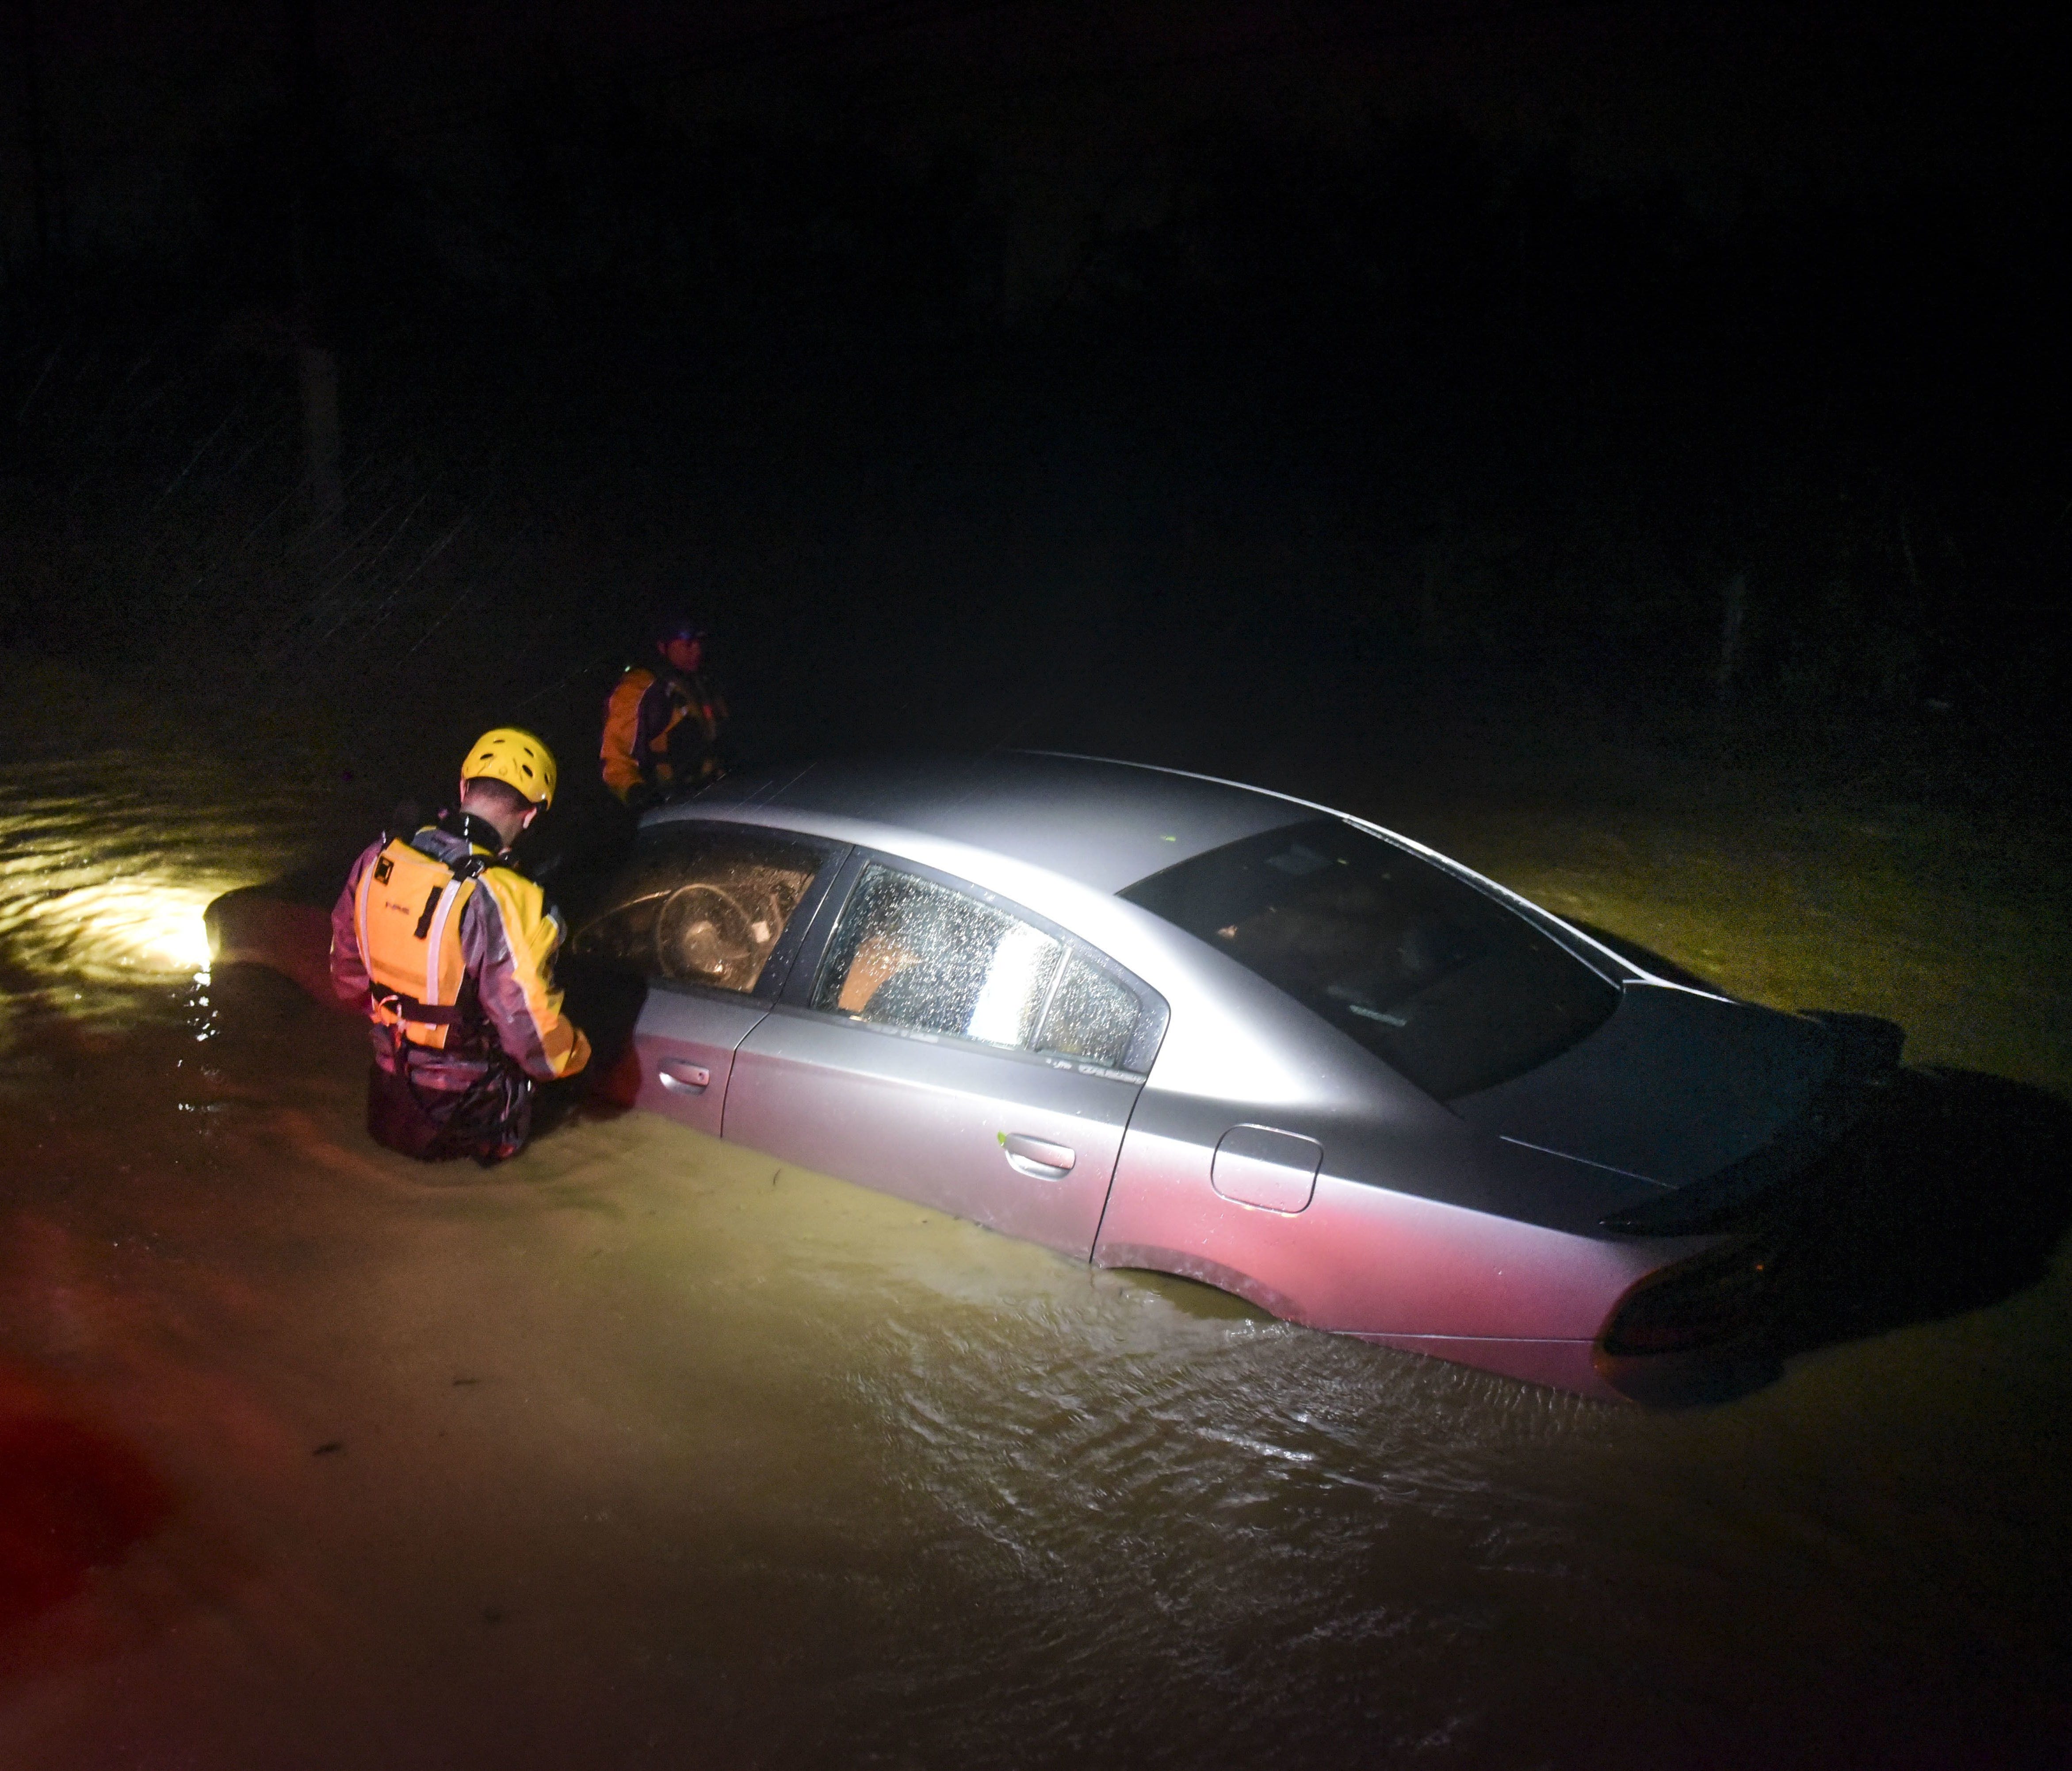 Rescue staff from the Municipal Emergency Management Agency investigate a flooded car during the passage of Hurricane Irma through the northeastern part of the island in Fajardo, Puerto Rico.